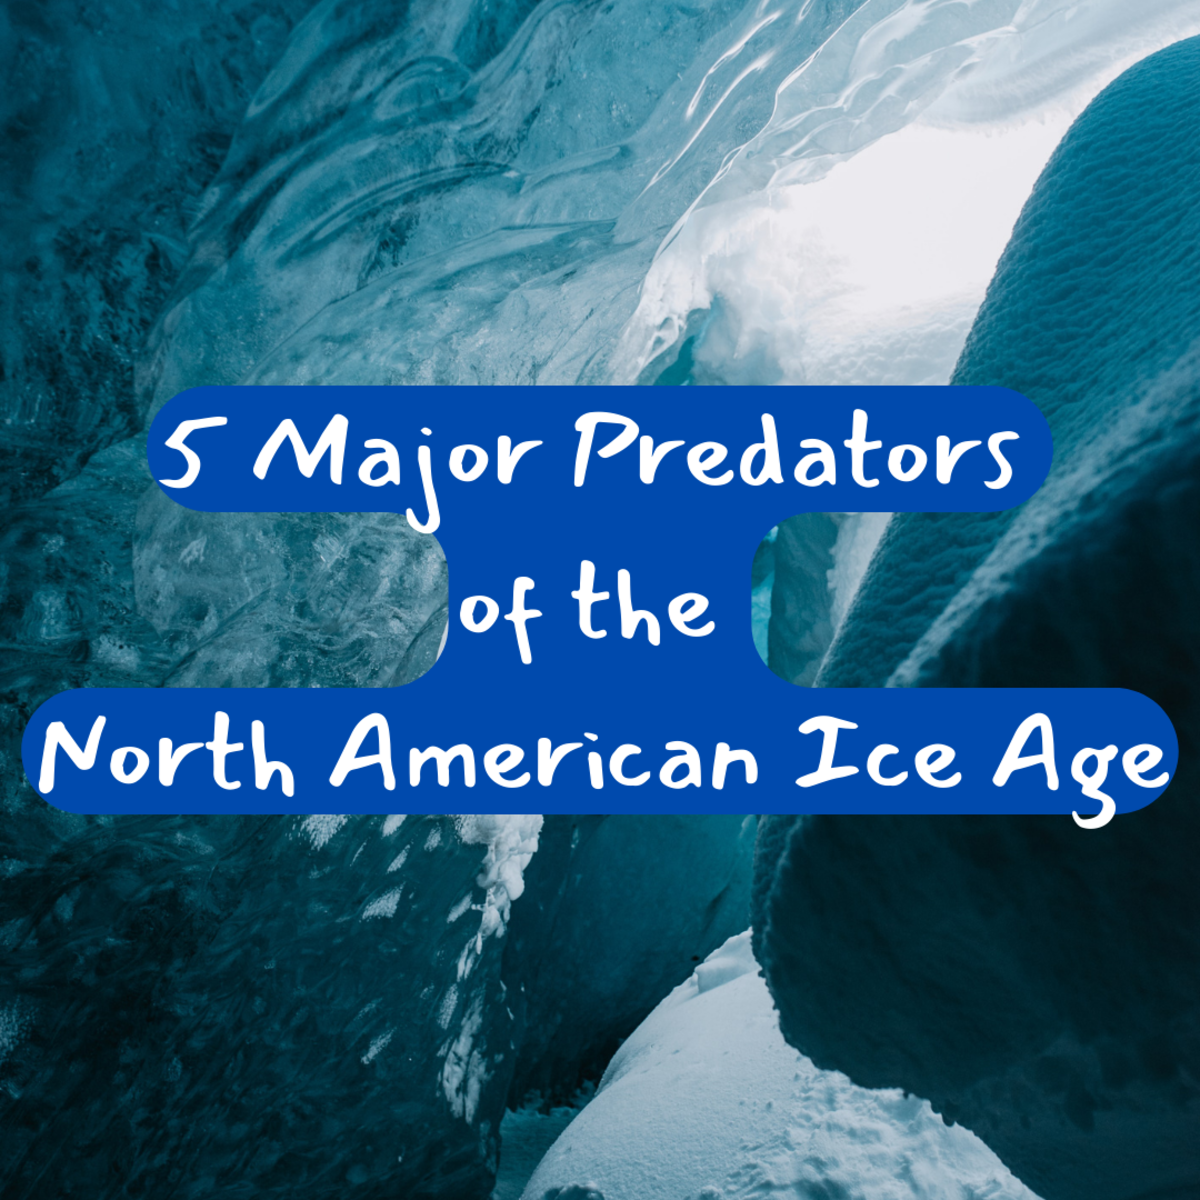 Read on to learn about 5 major Ice Age predators of the North American continent. These Pleistocene predators are sure to fascinate and frighten!